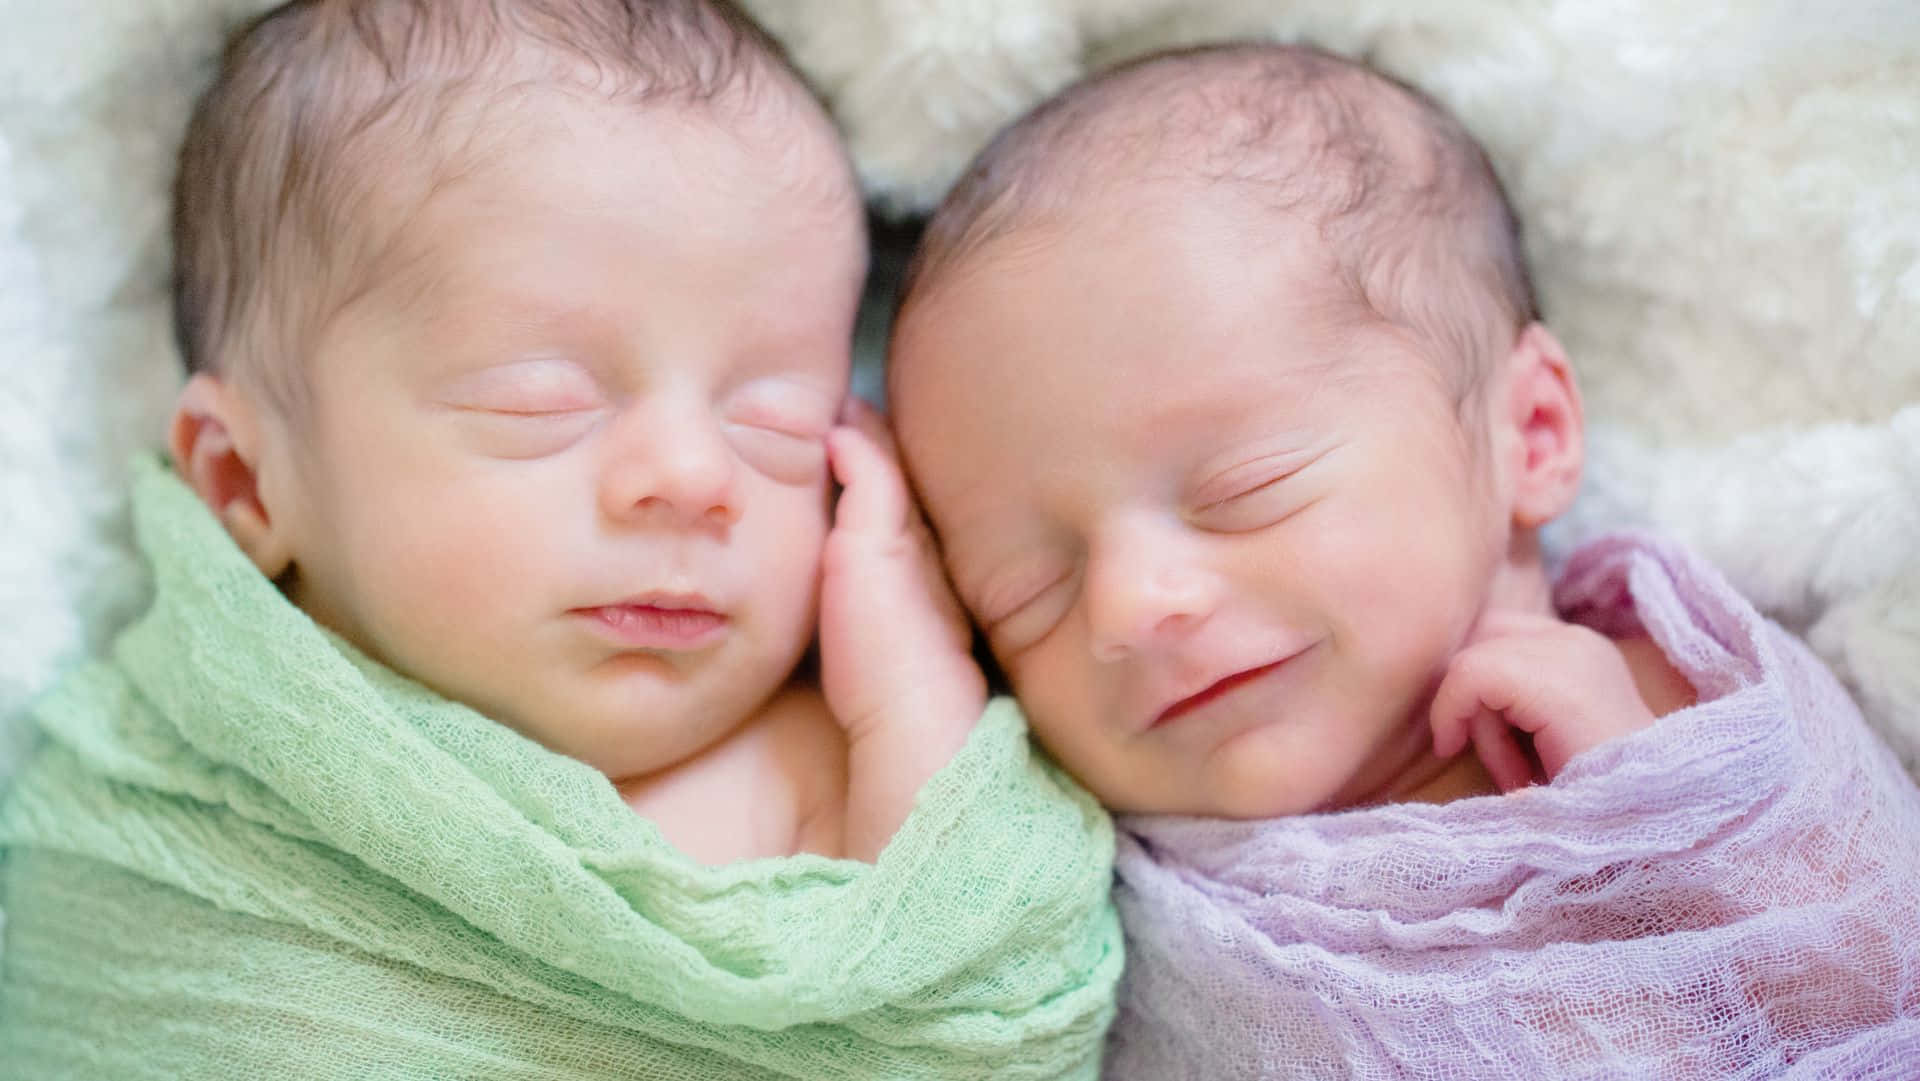 Adorable Twin Babies Smiling Together